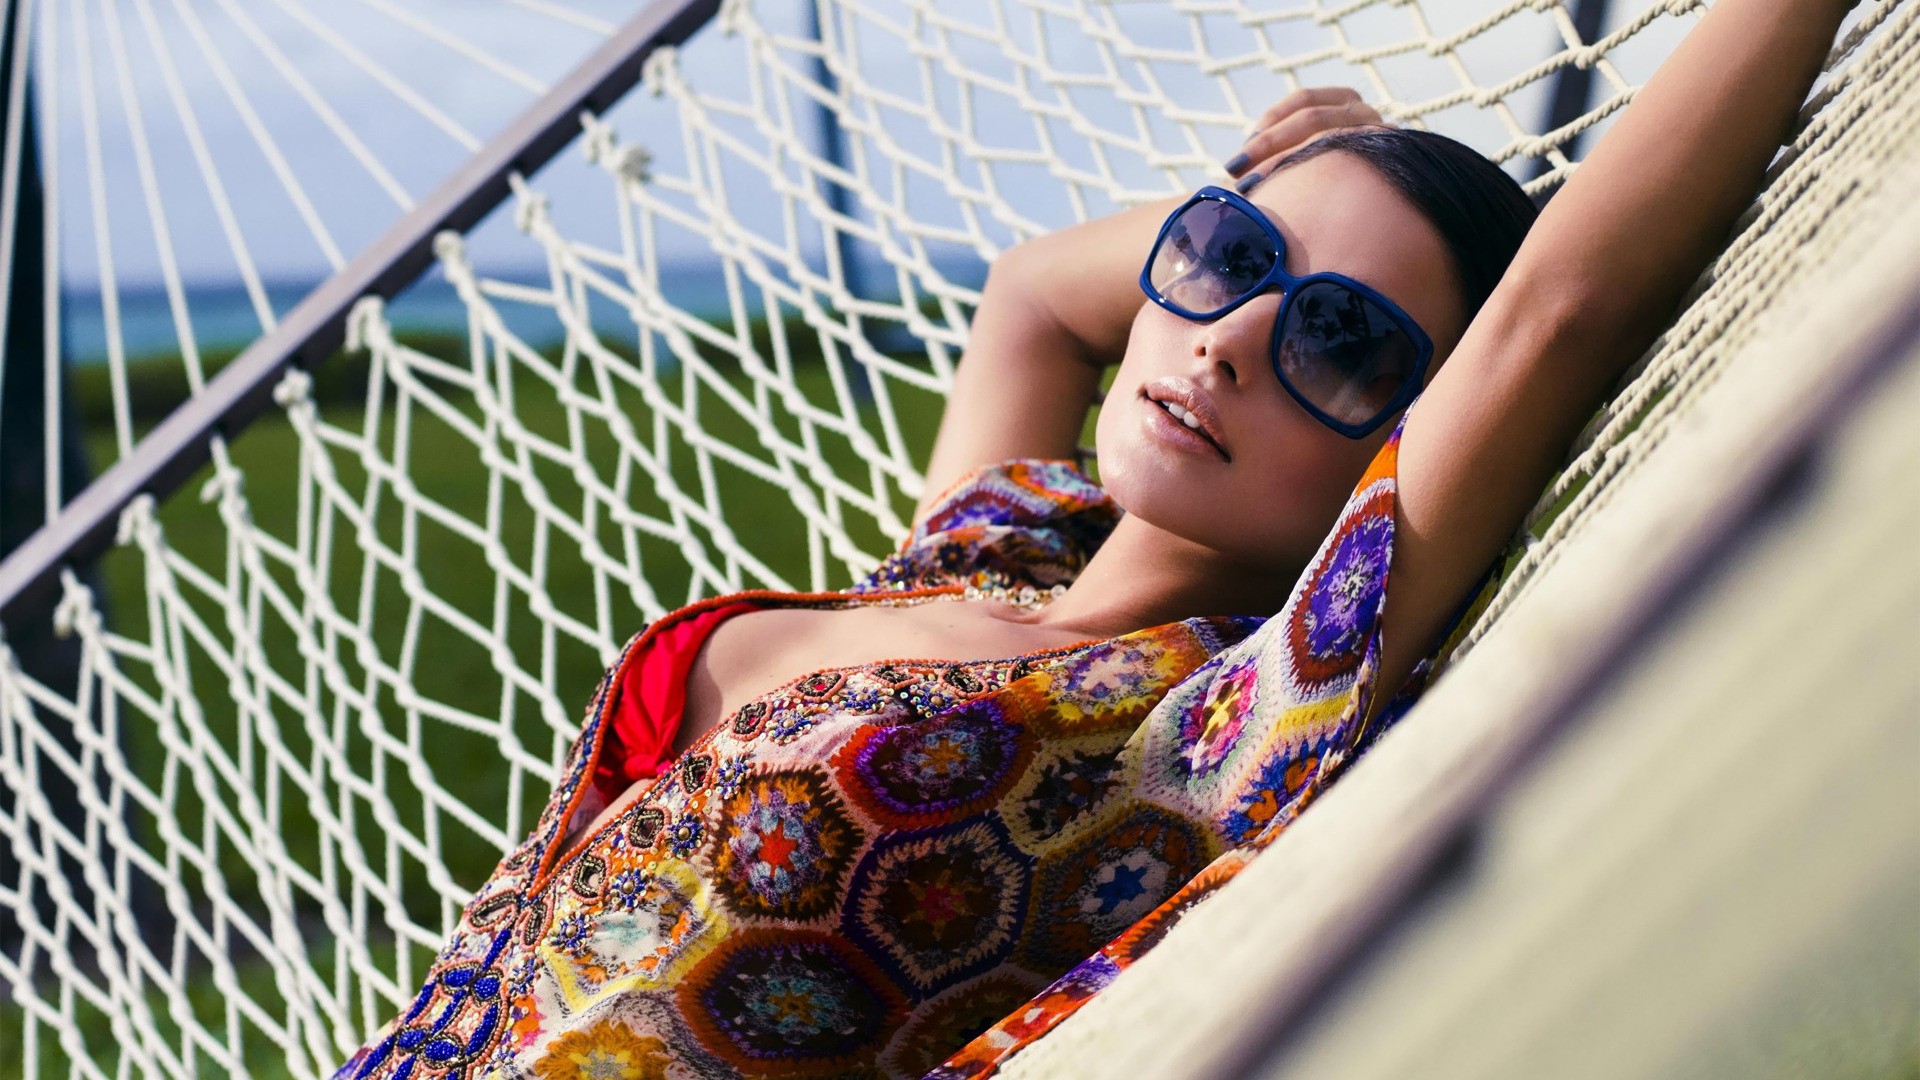 People 1920x1080 Diana Morales blouses unfastened colorful hammocks women with glasses women with shades sunglasses makeup women